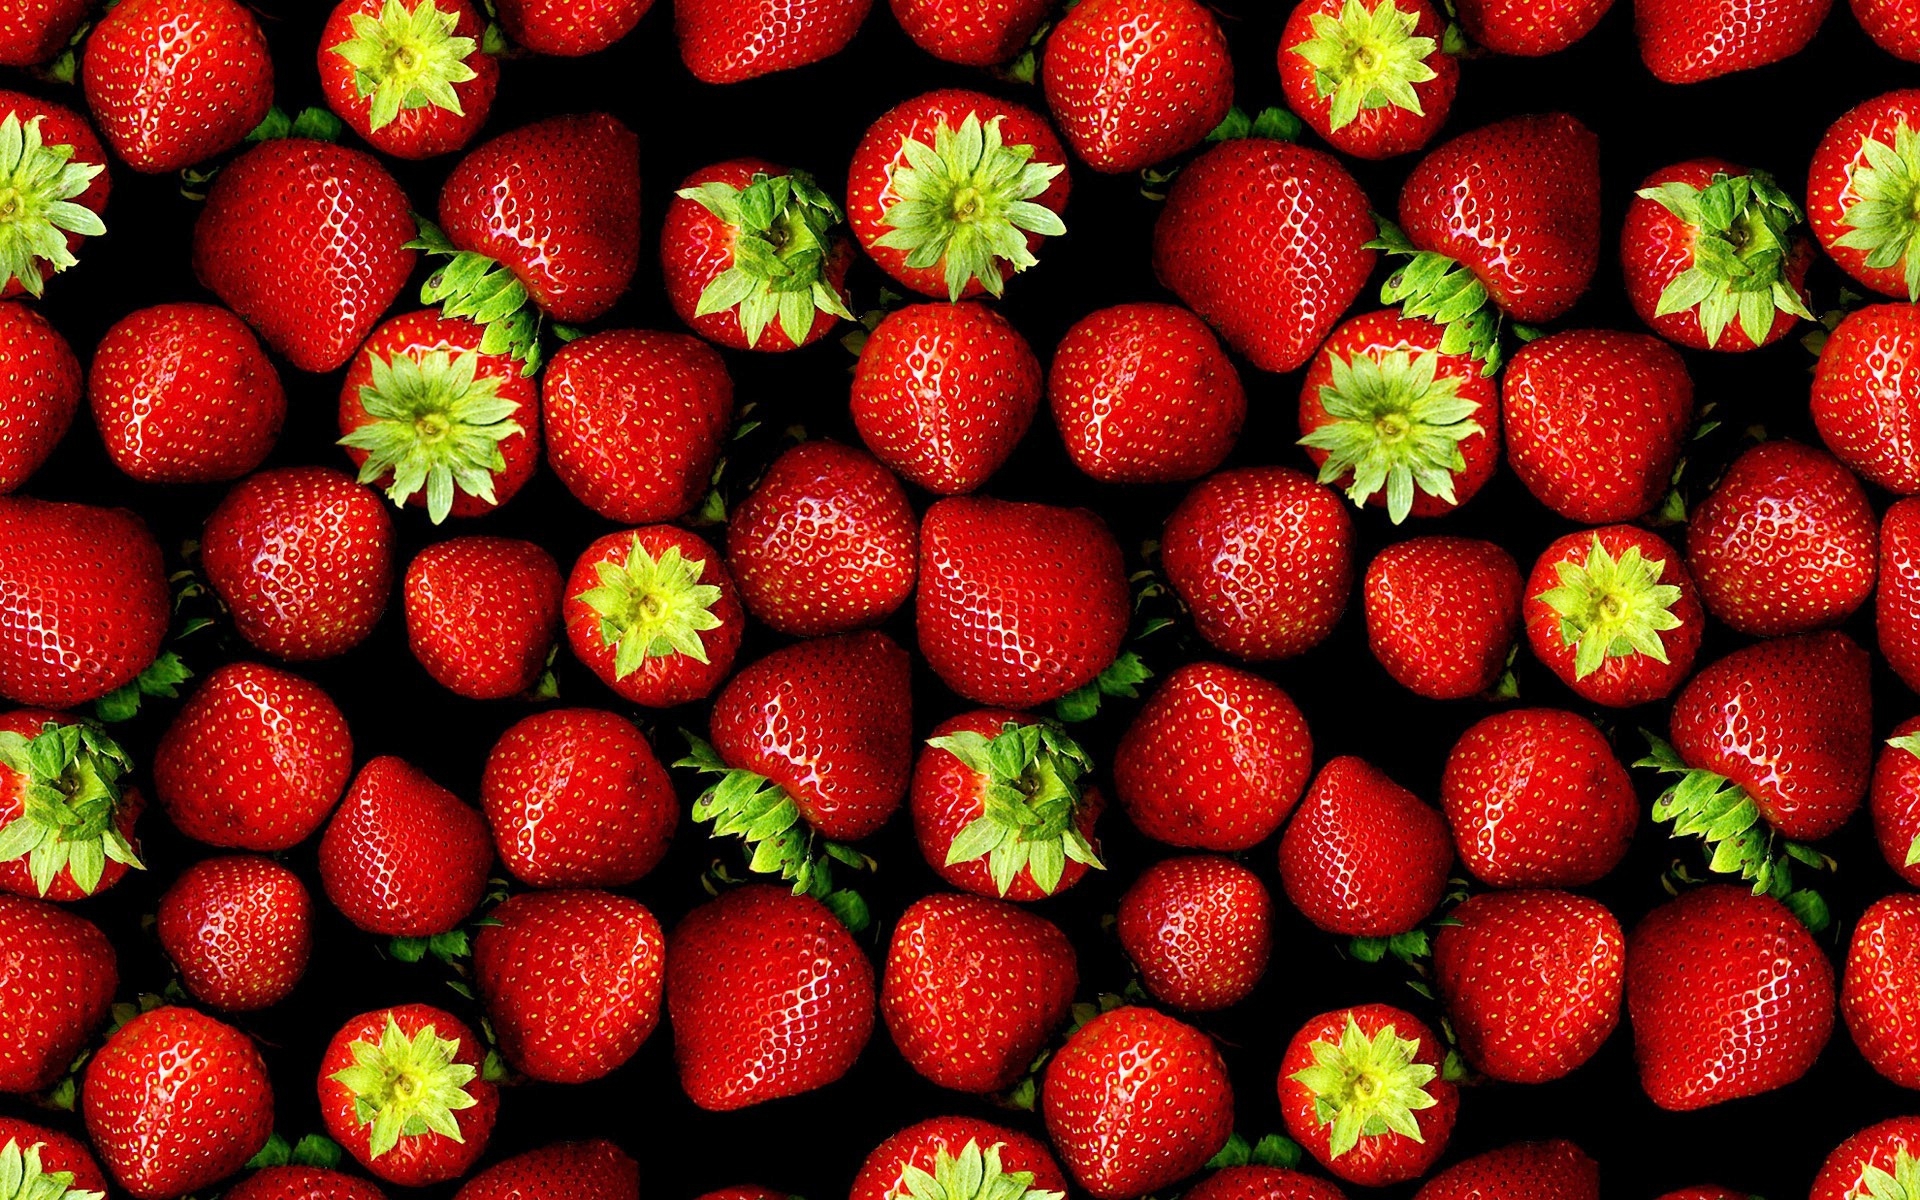 Strawberry Wallpapers Images Photos Pictures Backgrounds HD Wallpapers Download Free Images Wallpaper [wallpaper981.blogspot.com]